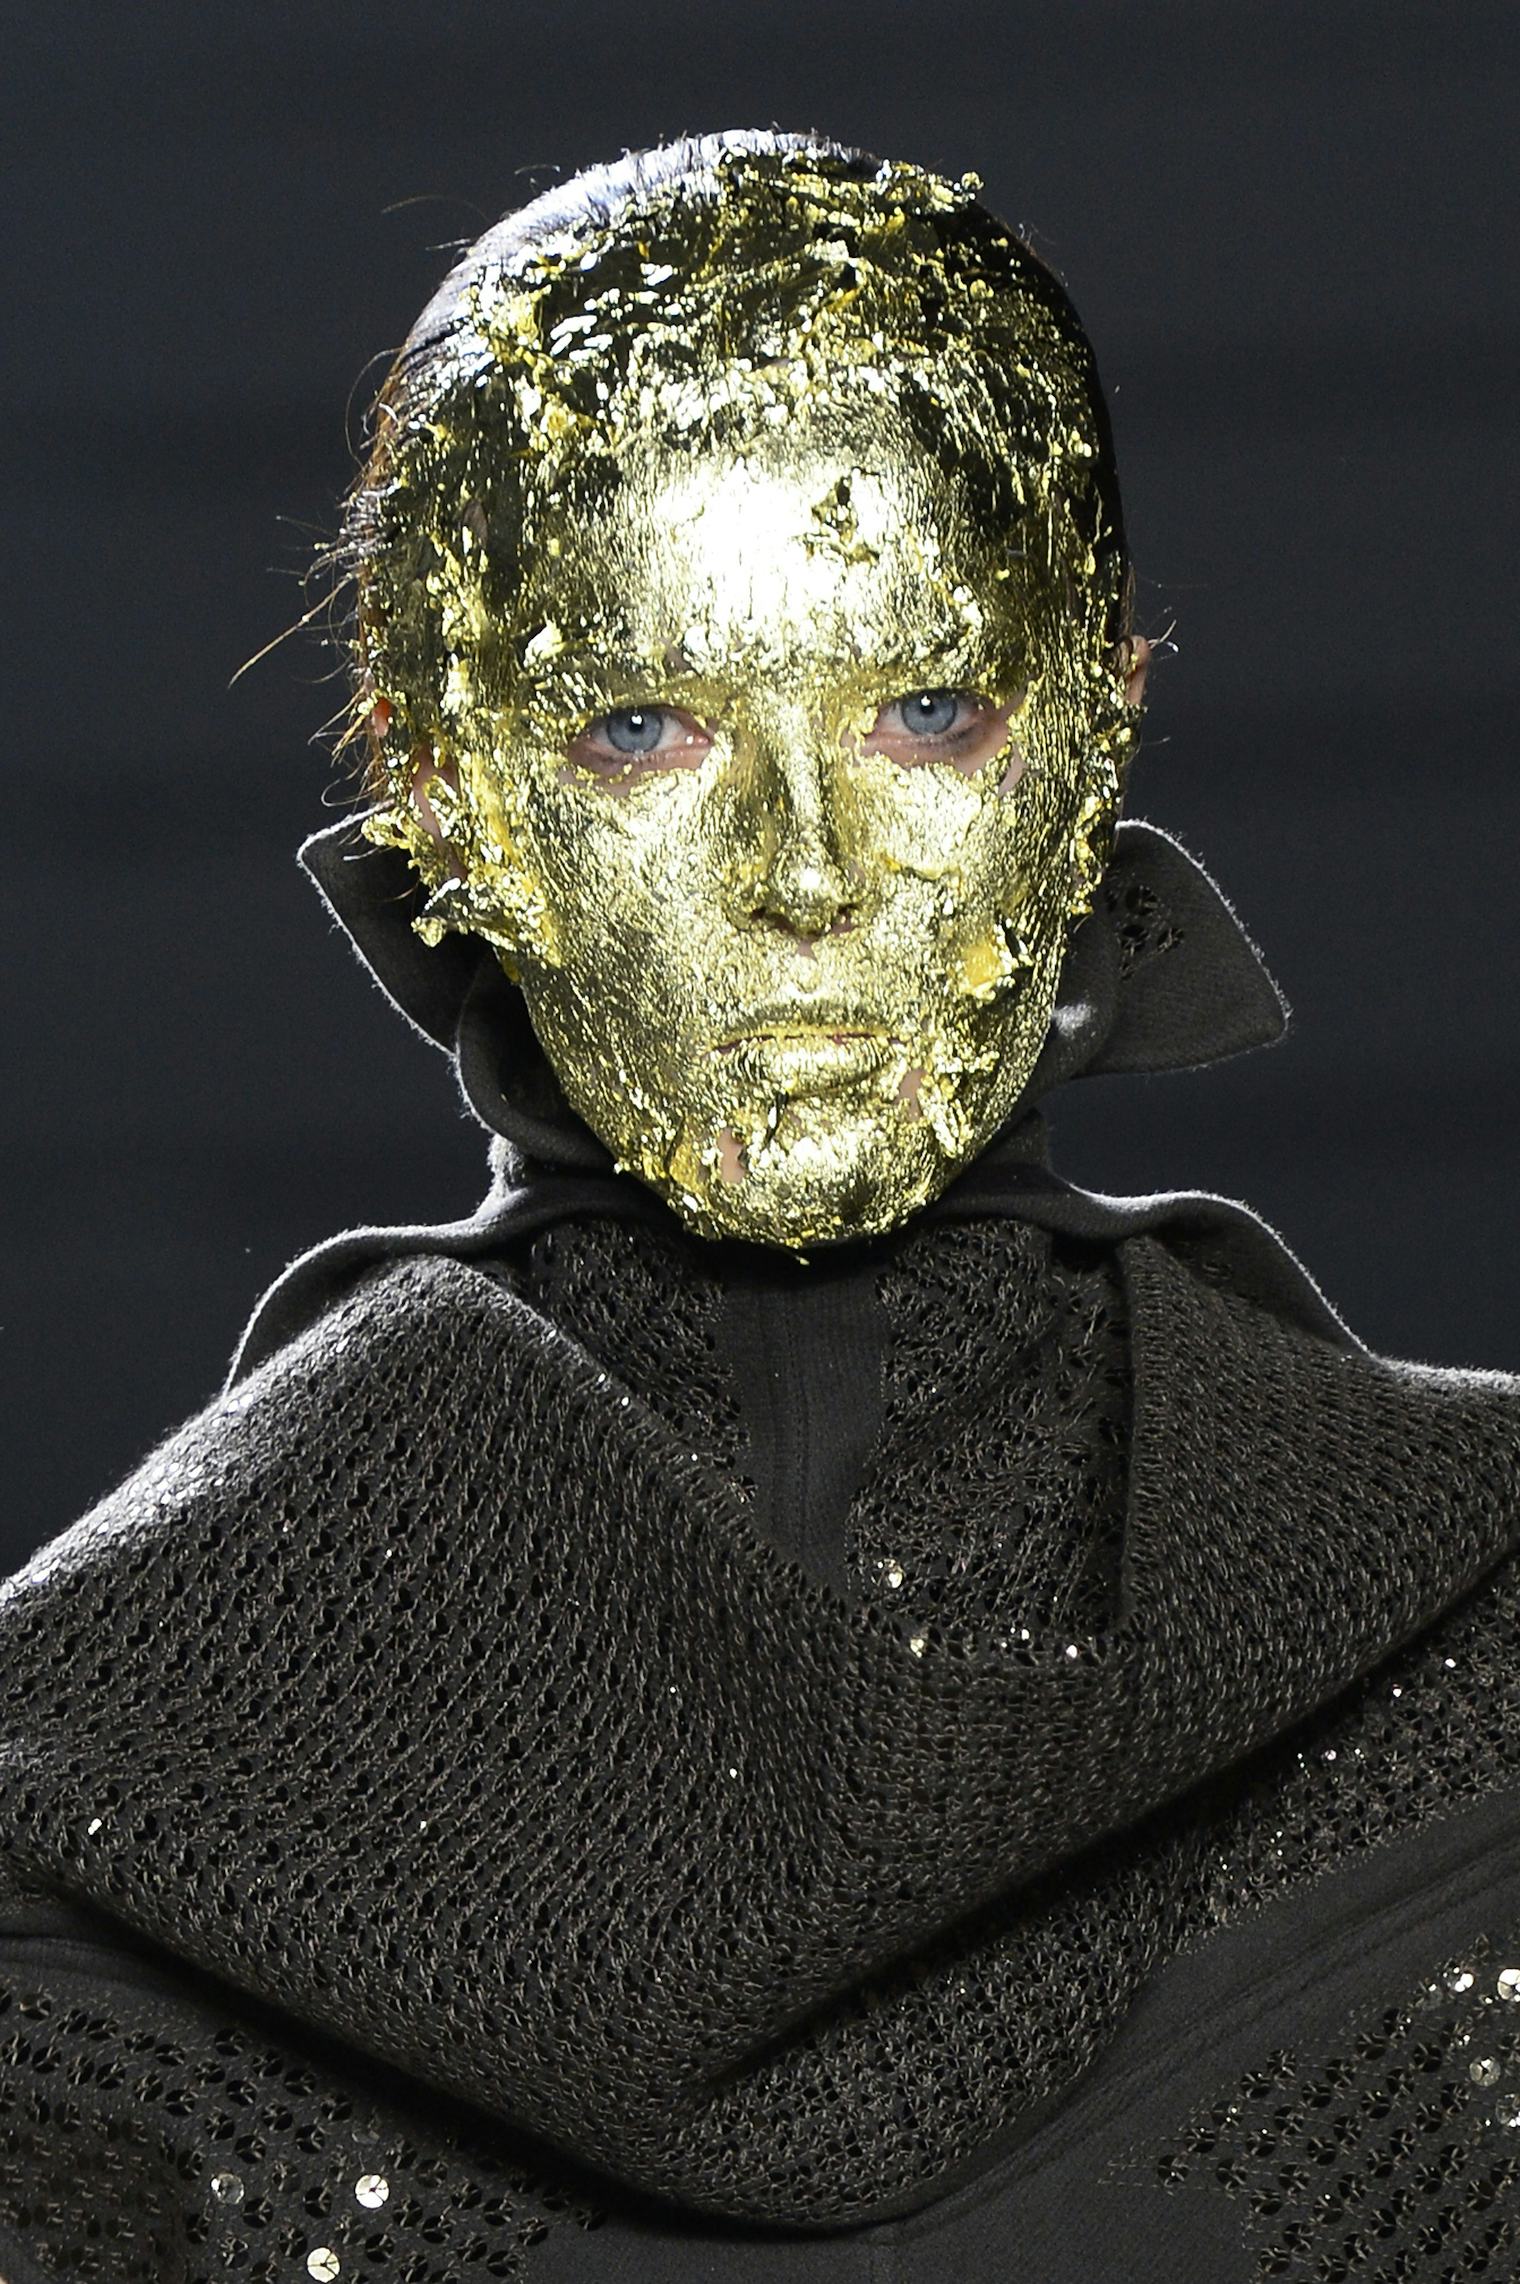 Gold Leaf Masks At Rick Owens Are Cool, But They Probably Won't Be The ...